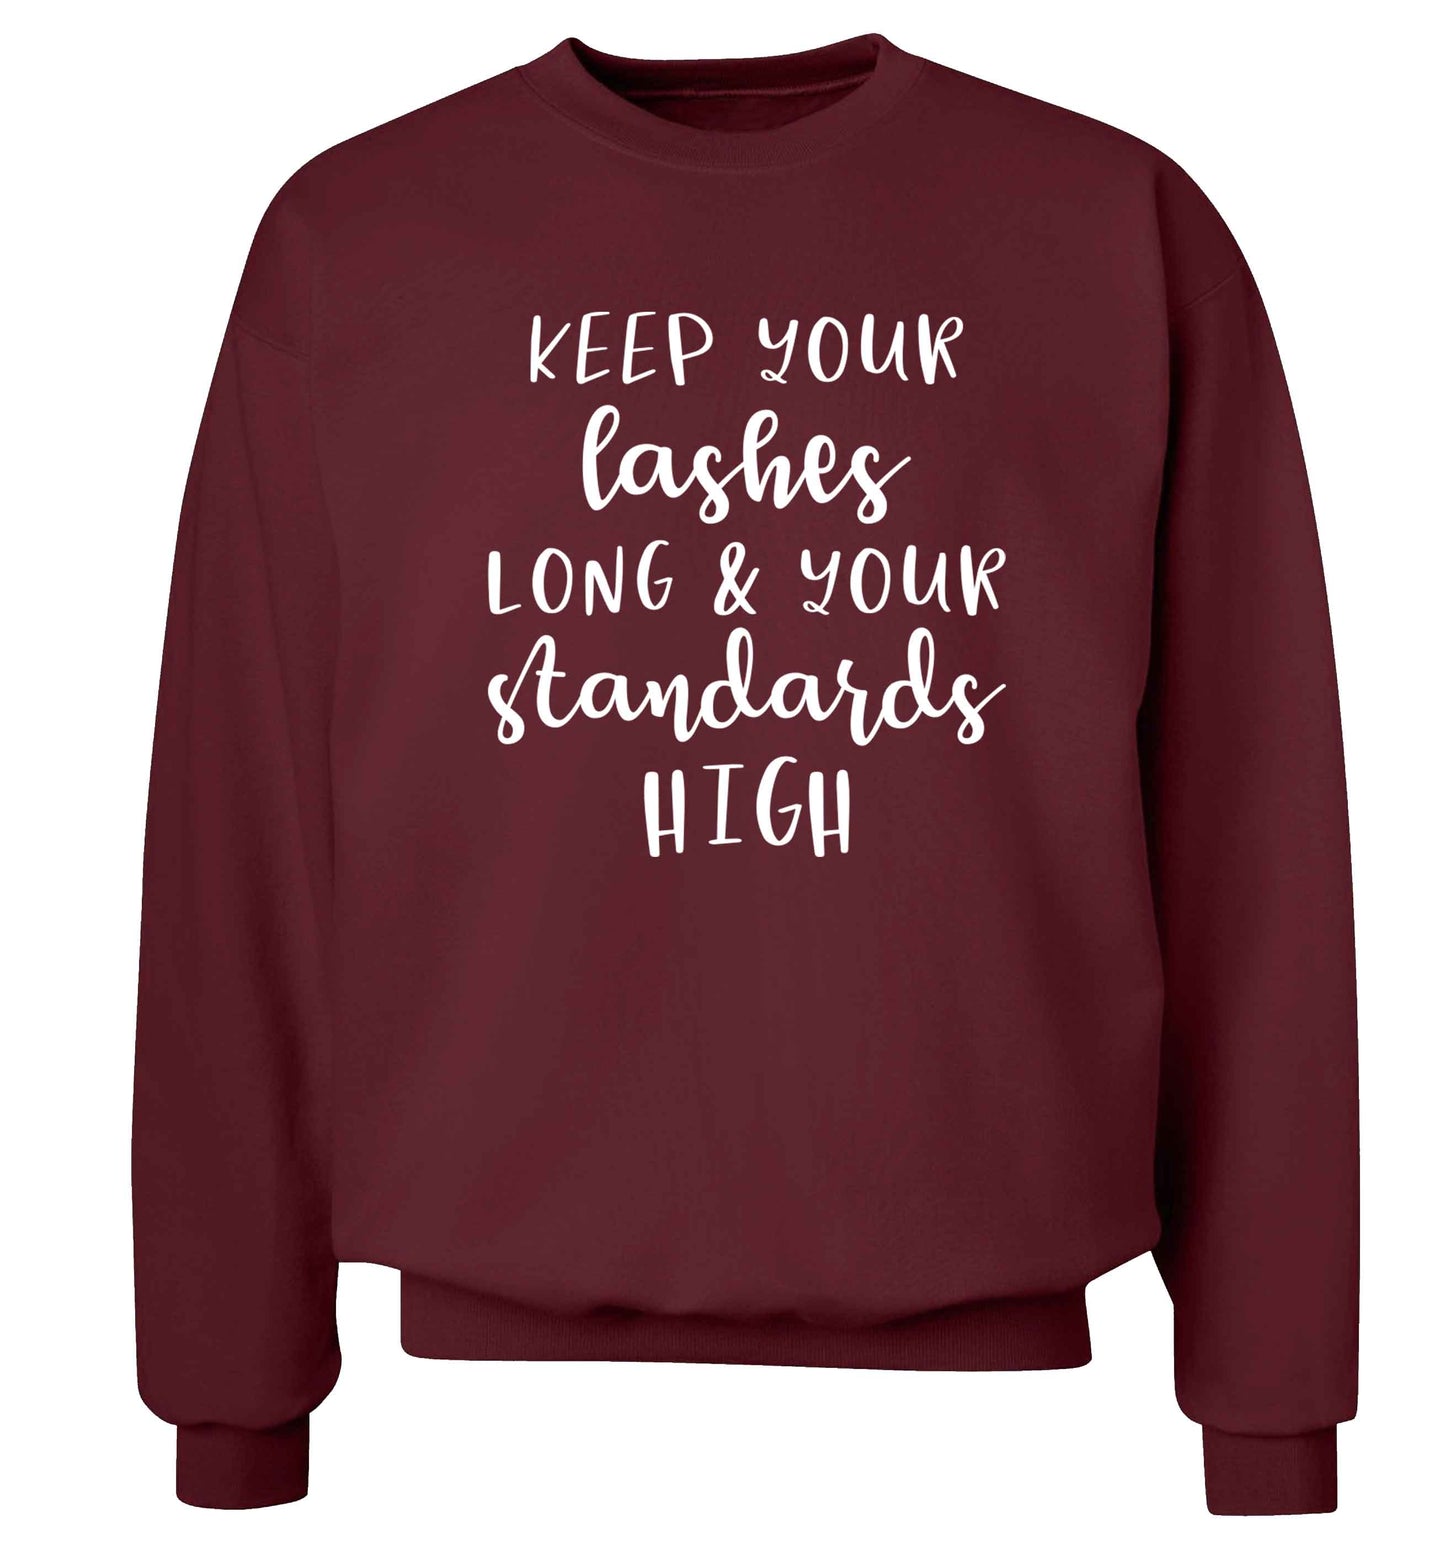 Keep your lashes long and your standards high Adult's unisex maroon Sweater 2XL